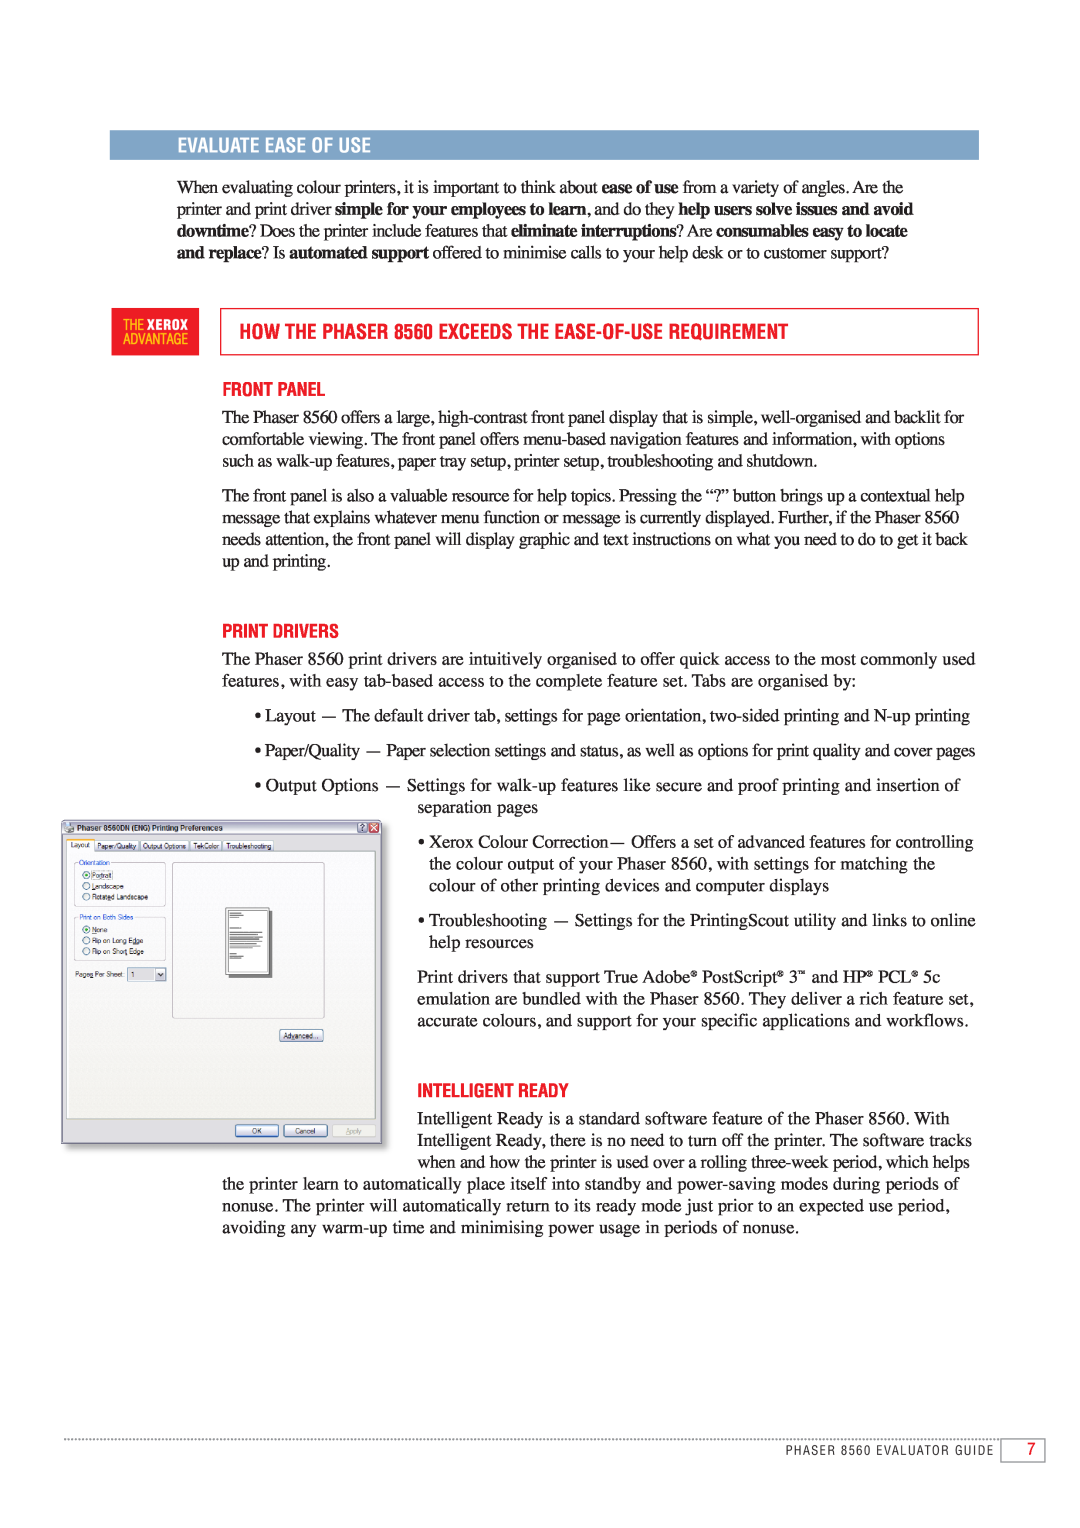 Xerox manual Evaluate Ease Of Use, HOW THE PHASER 8560 EXCEEDS THE EASE-OF-USE REQUIREMENT, Front Panel, Print Drivers 